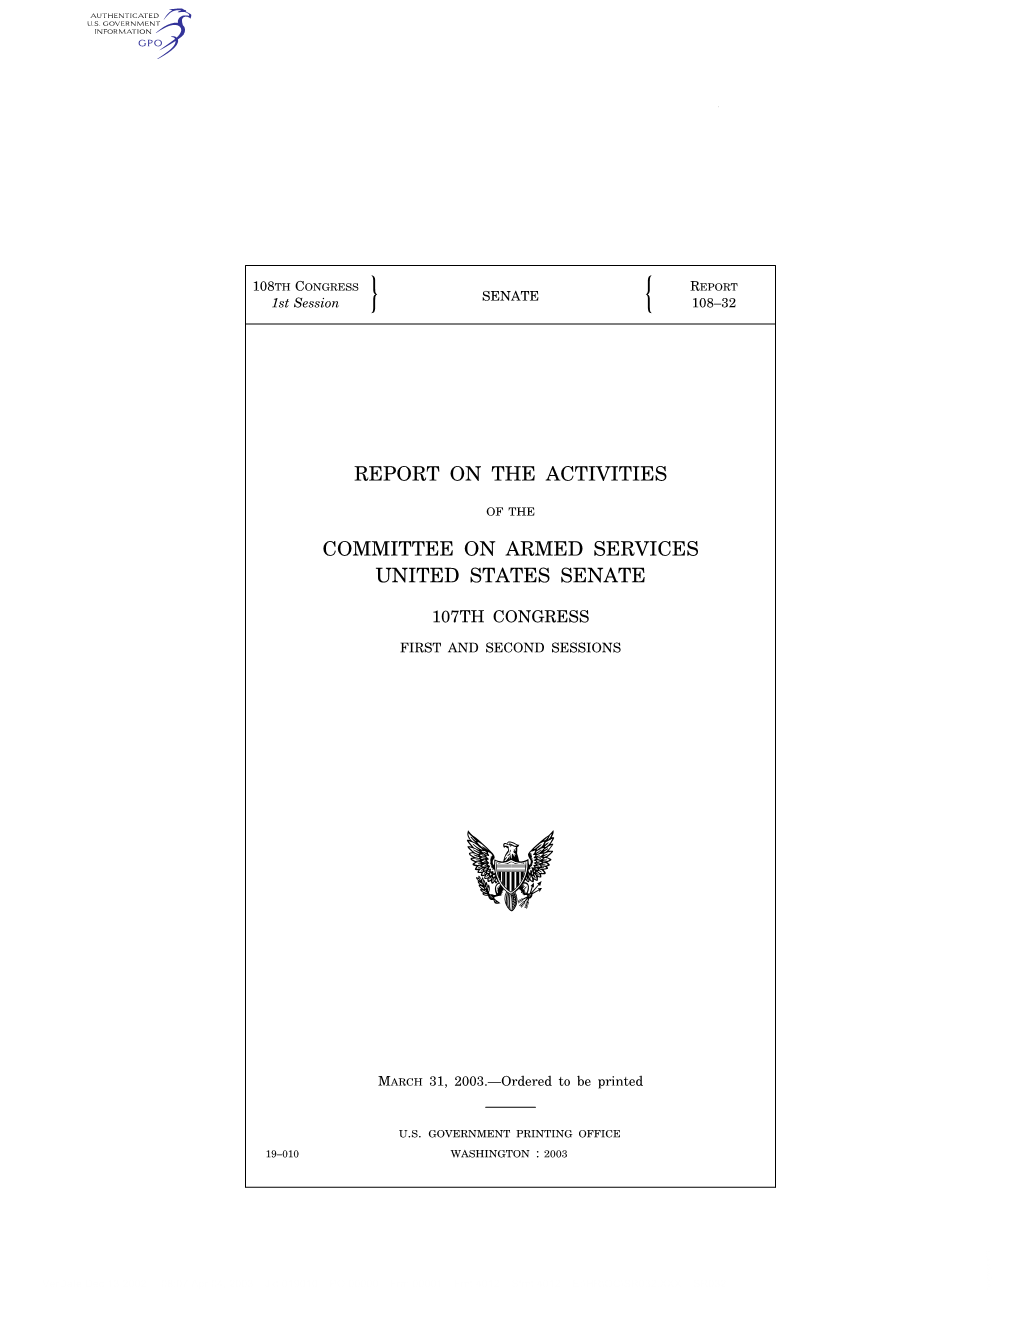 Report on the Activities Committee on Armed